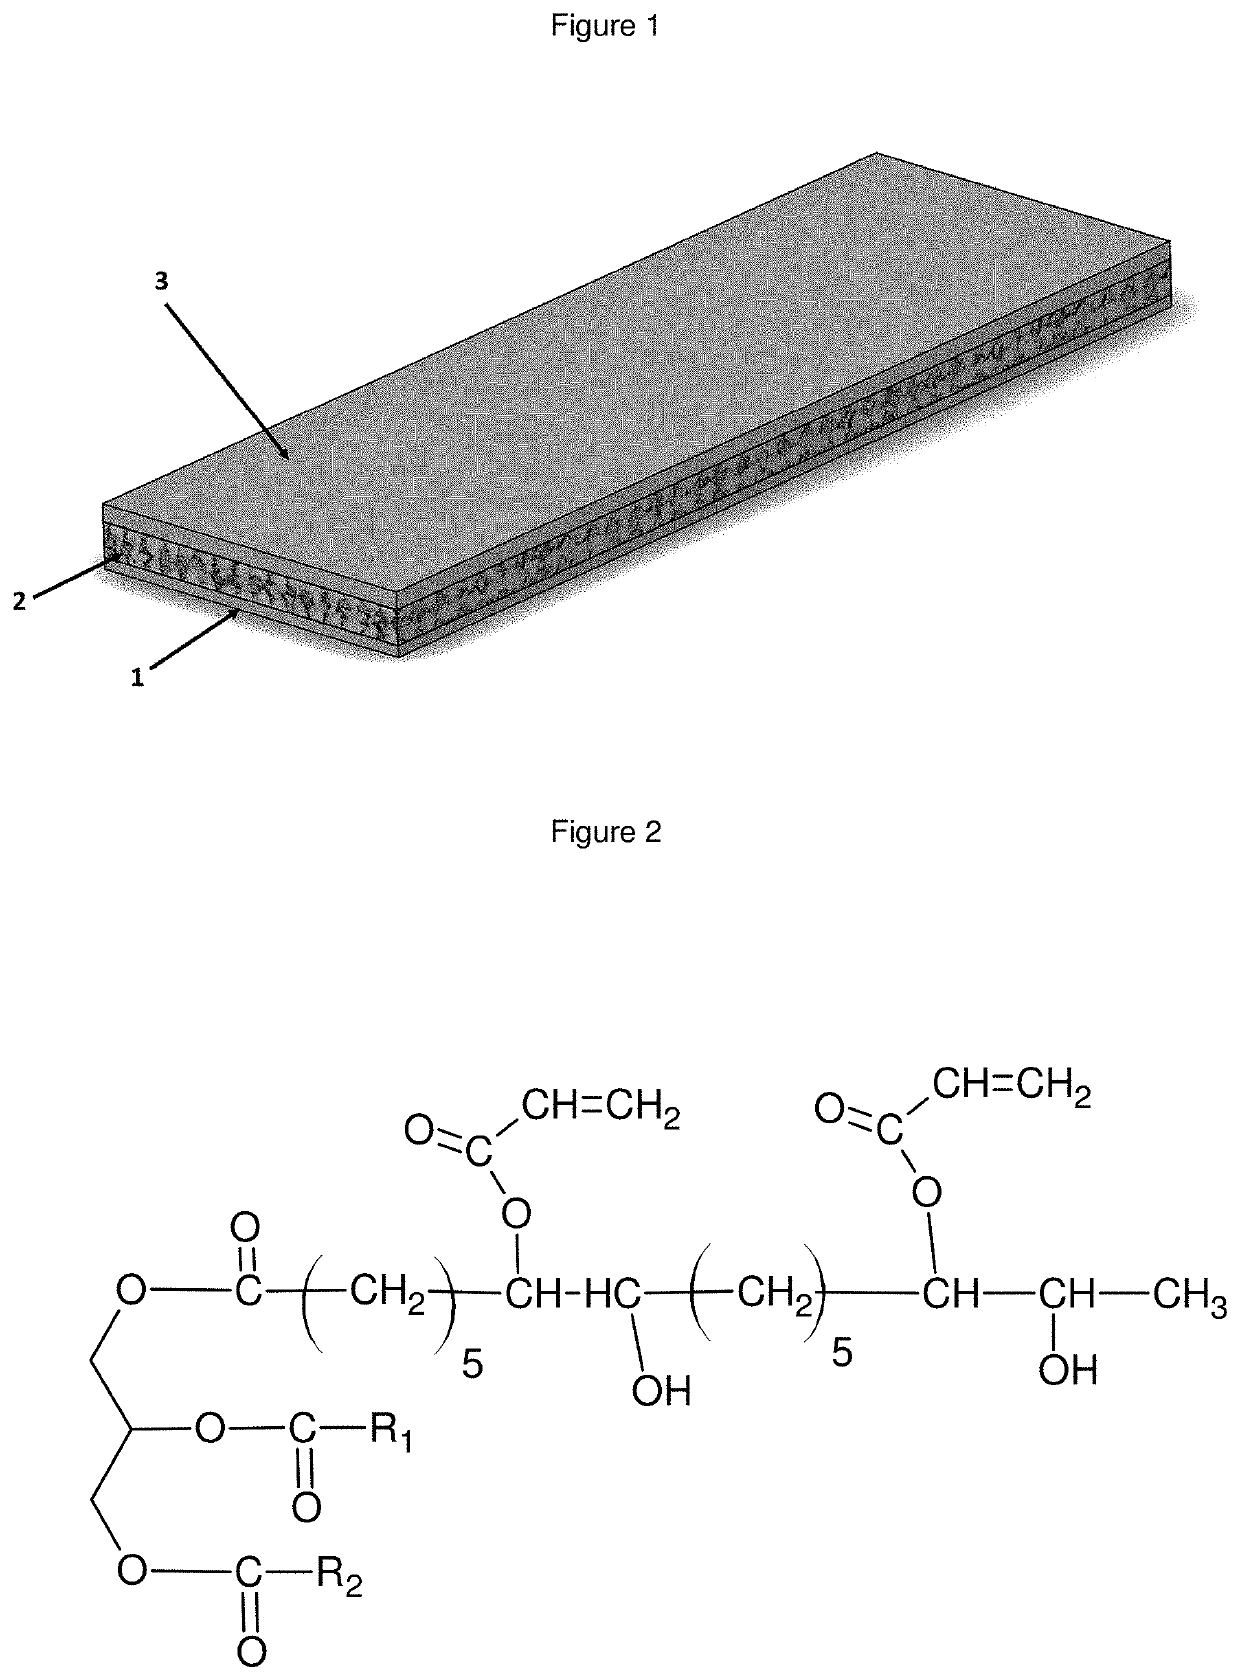 Synthetic rubber tile with thermal resistance modulation